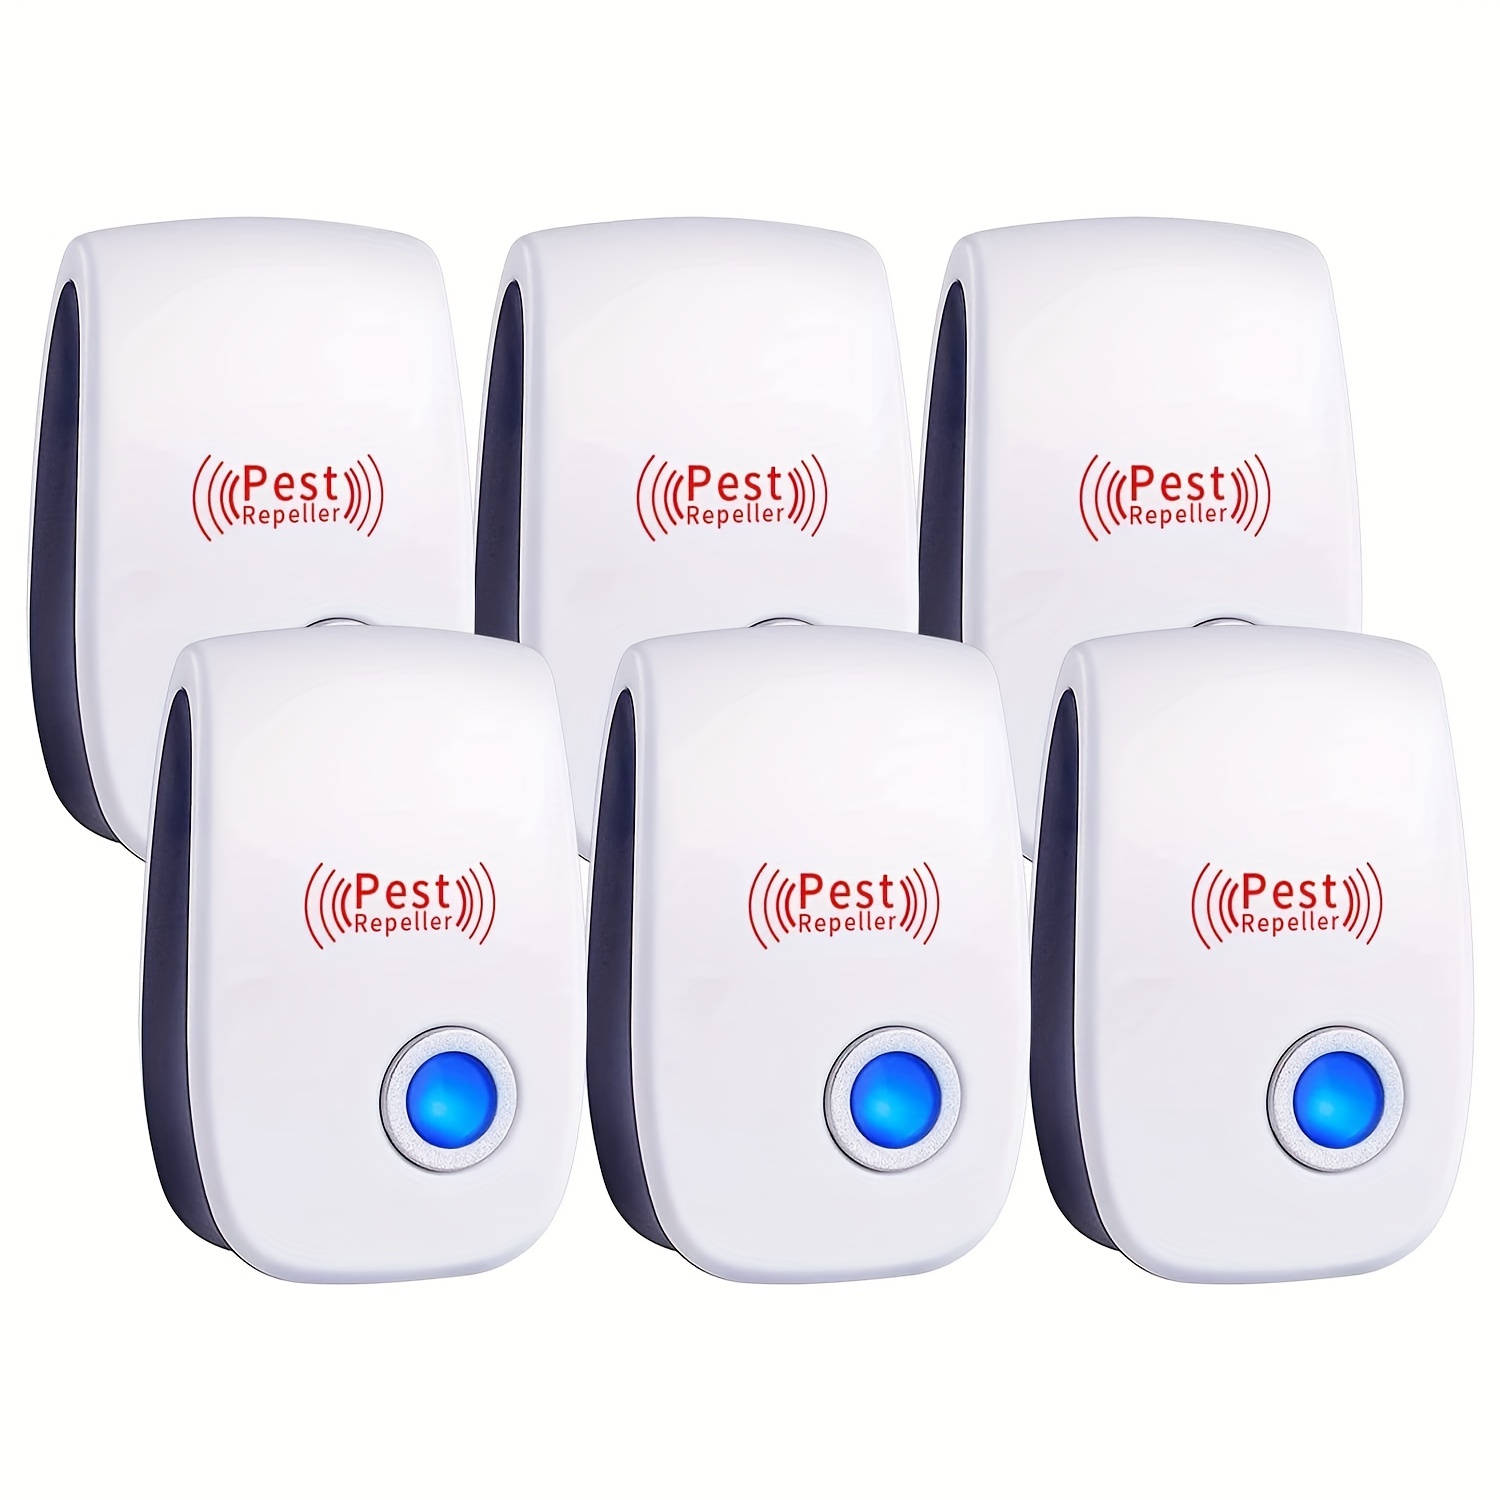 

6-pack Ultrasonic Pest Repellent - Keep Bugs Away From Your Home Up To 120 Sq. Meters!